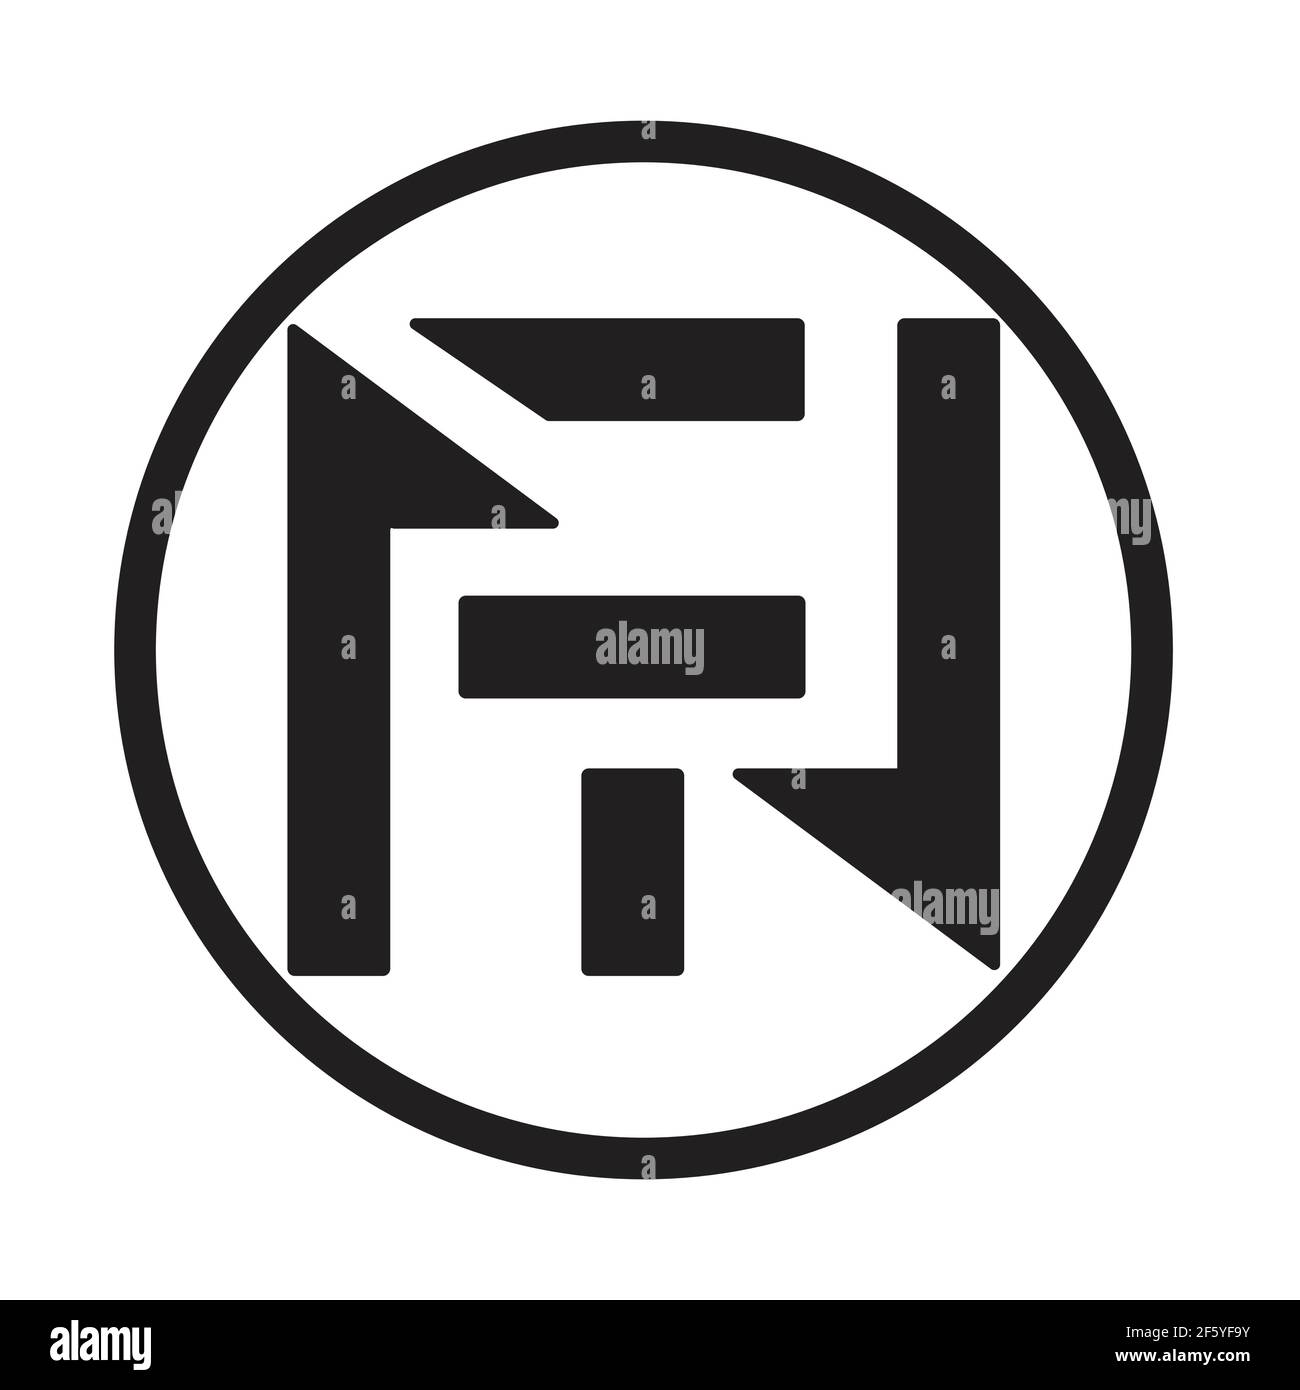 T n logo Black and White Stock Photos & Images - Alamy